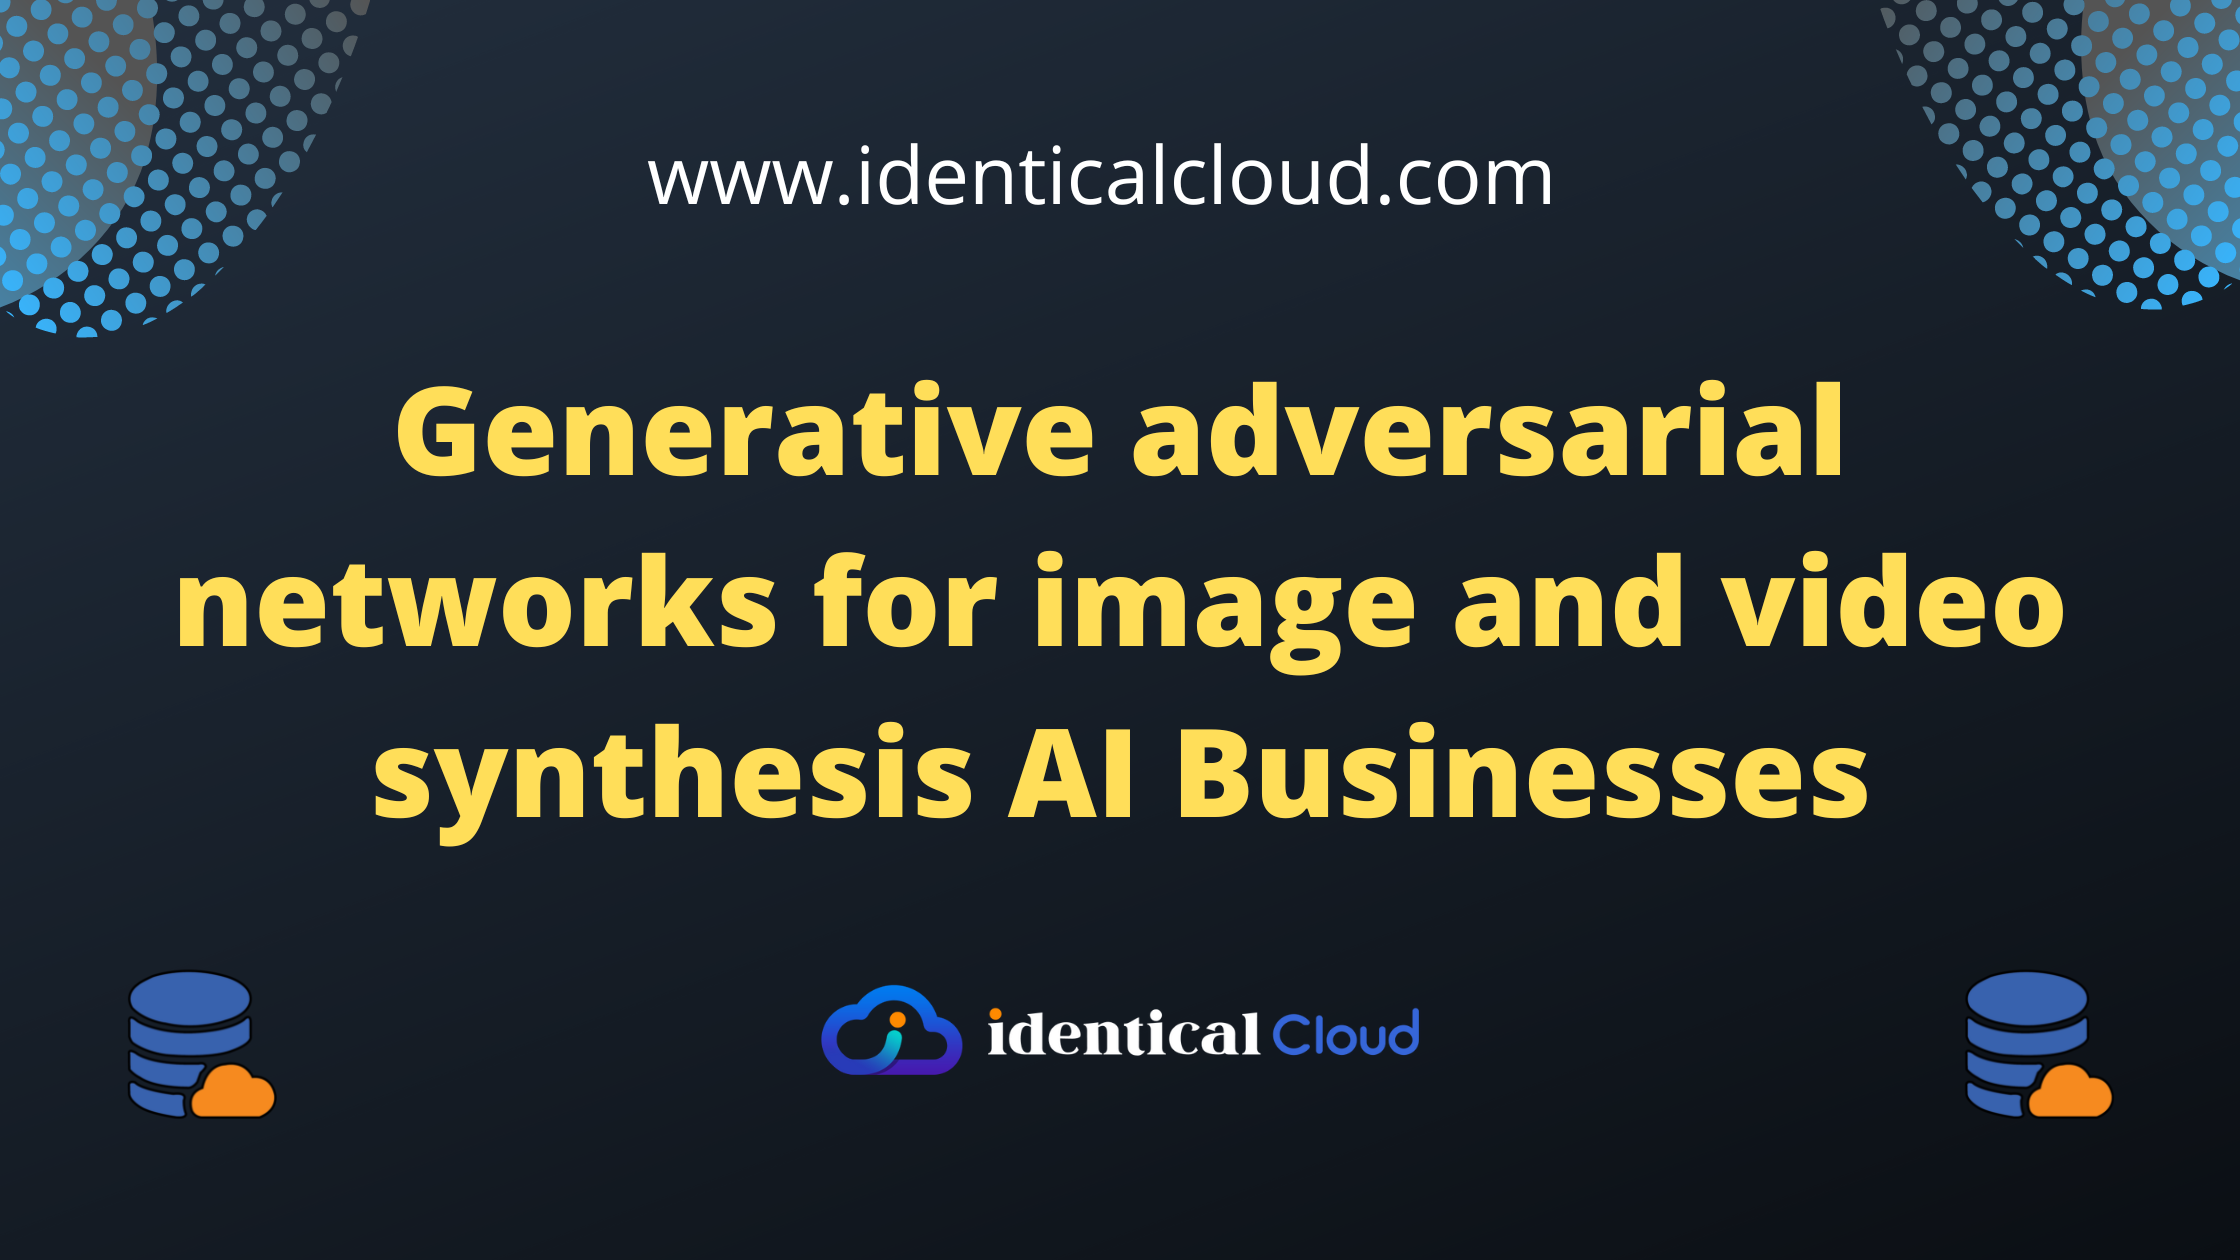 Generative adversarial networks for image and video synthesis AI Businesses - identicalcloud.com